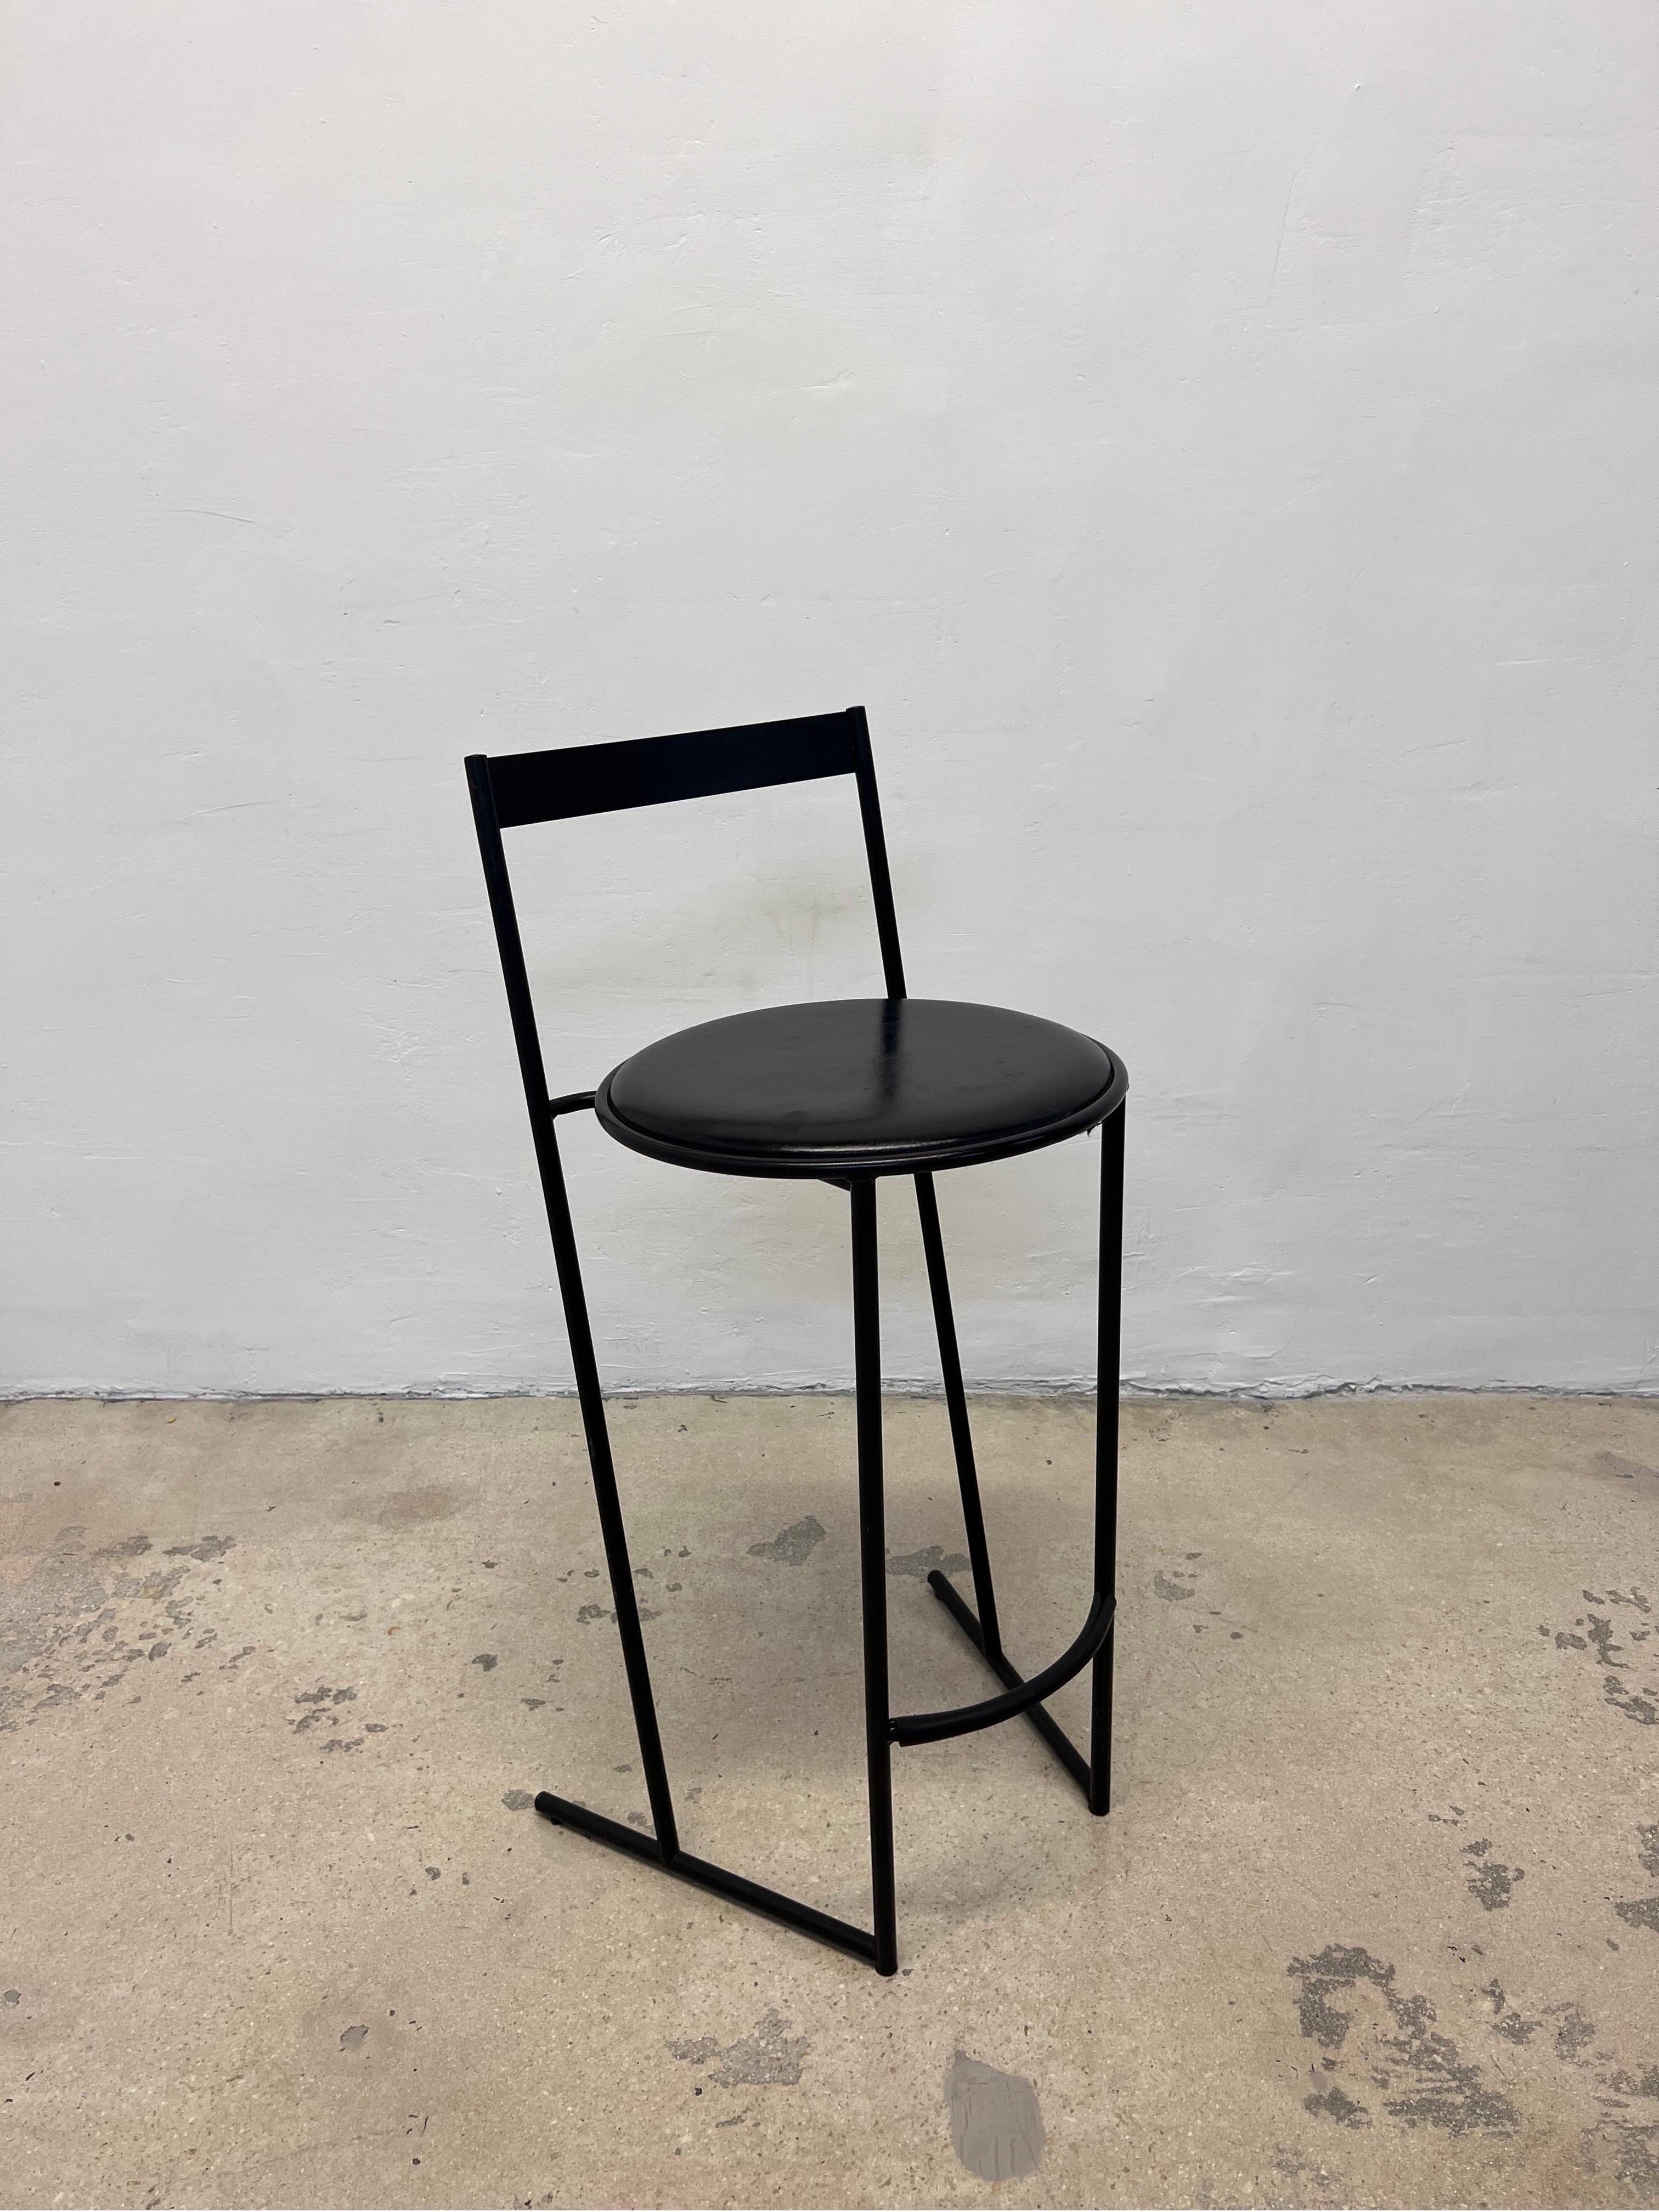 Considered one of his first chair designs, the Musmé counter stool was designed by Emilio Nanni for Fly Line. The stool consists of a steel cantilevered frame and a black vinyl seat.